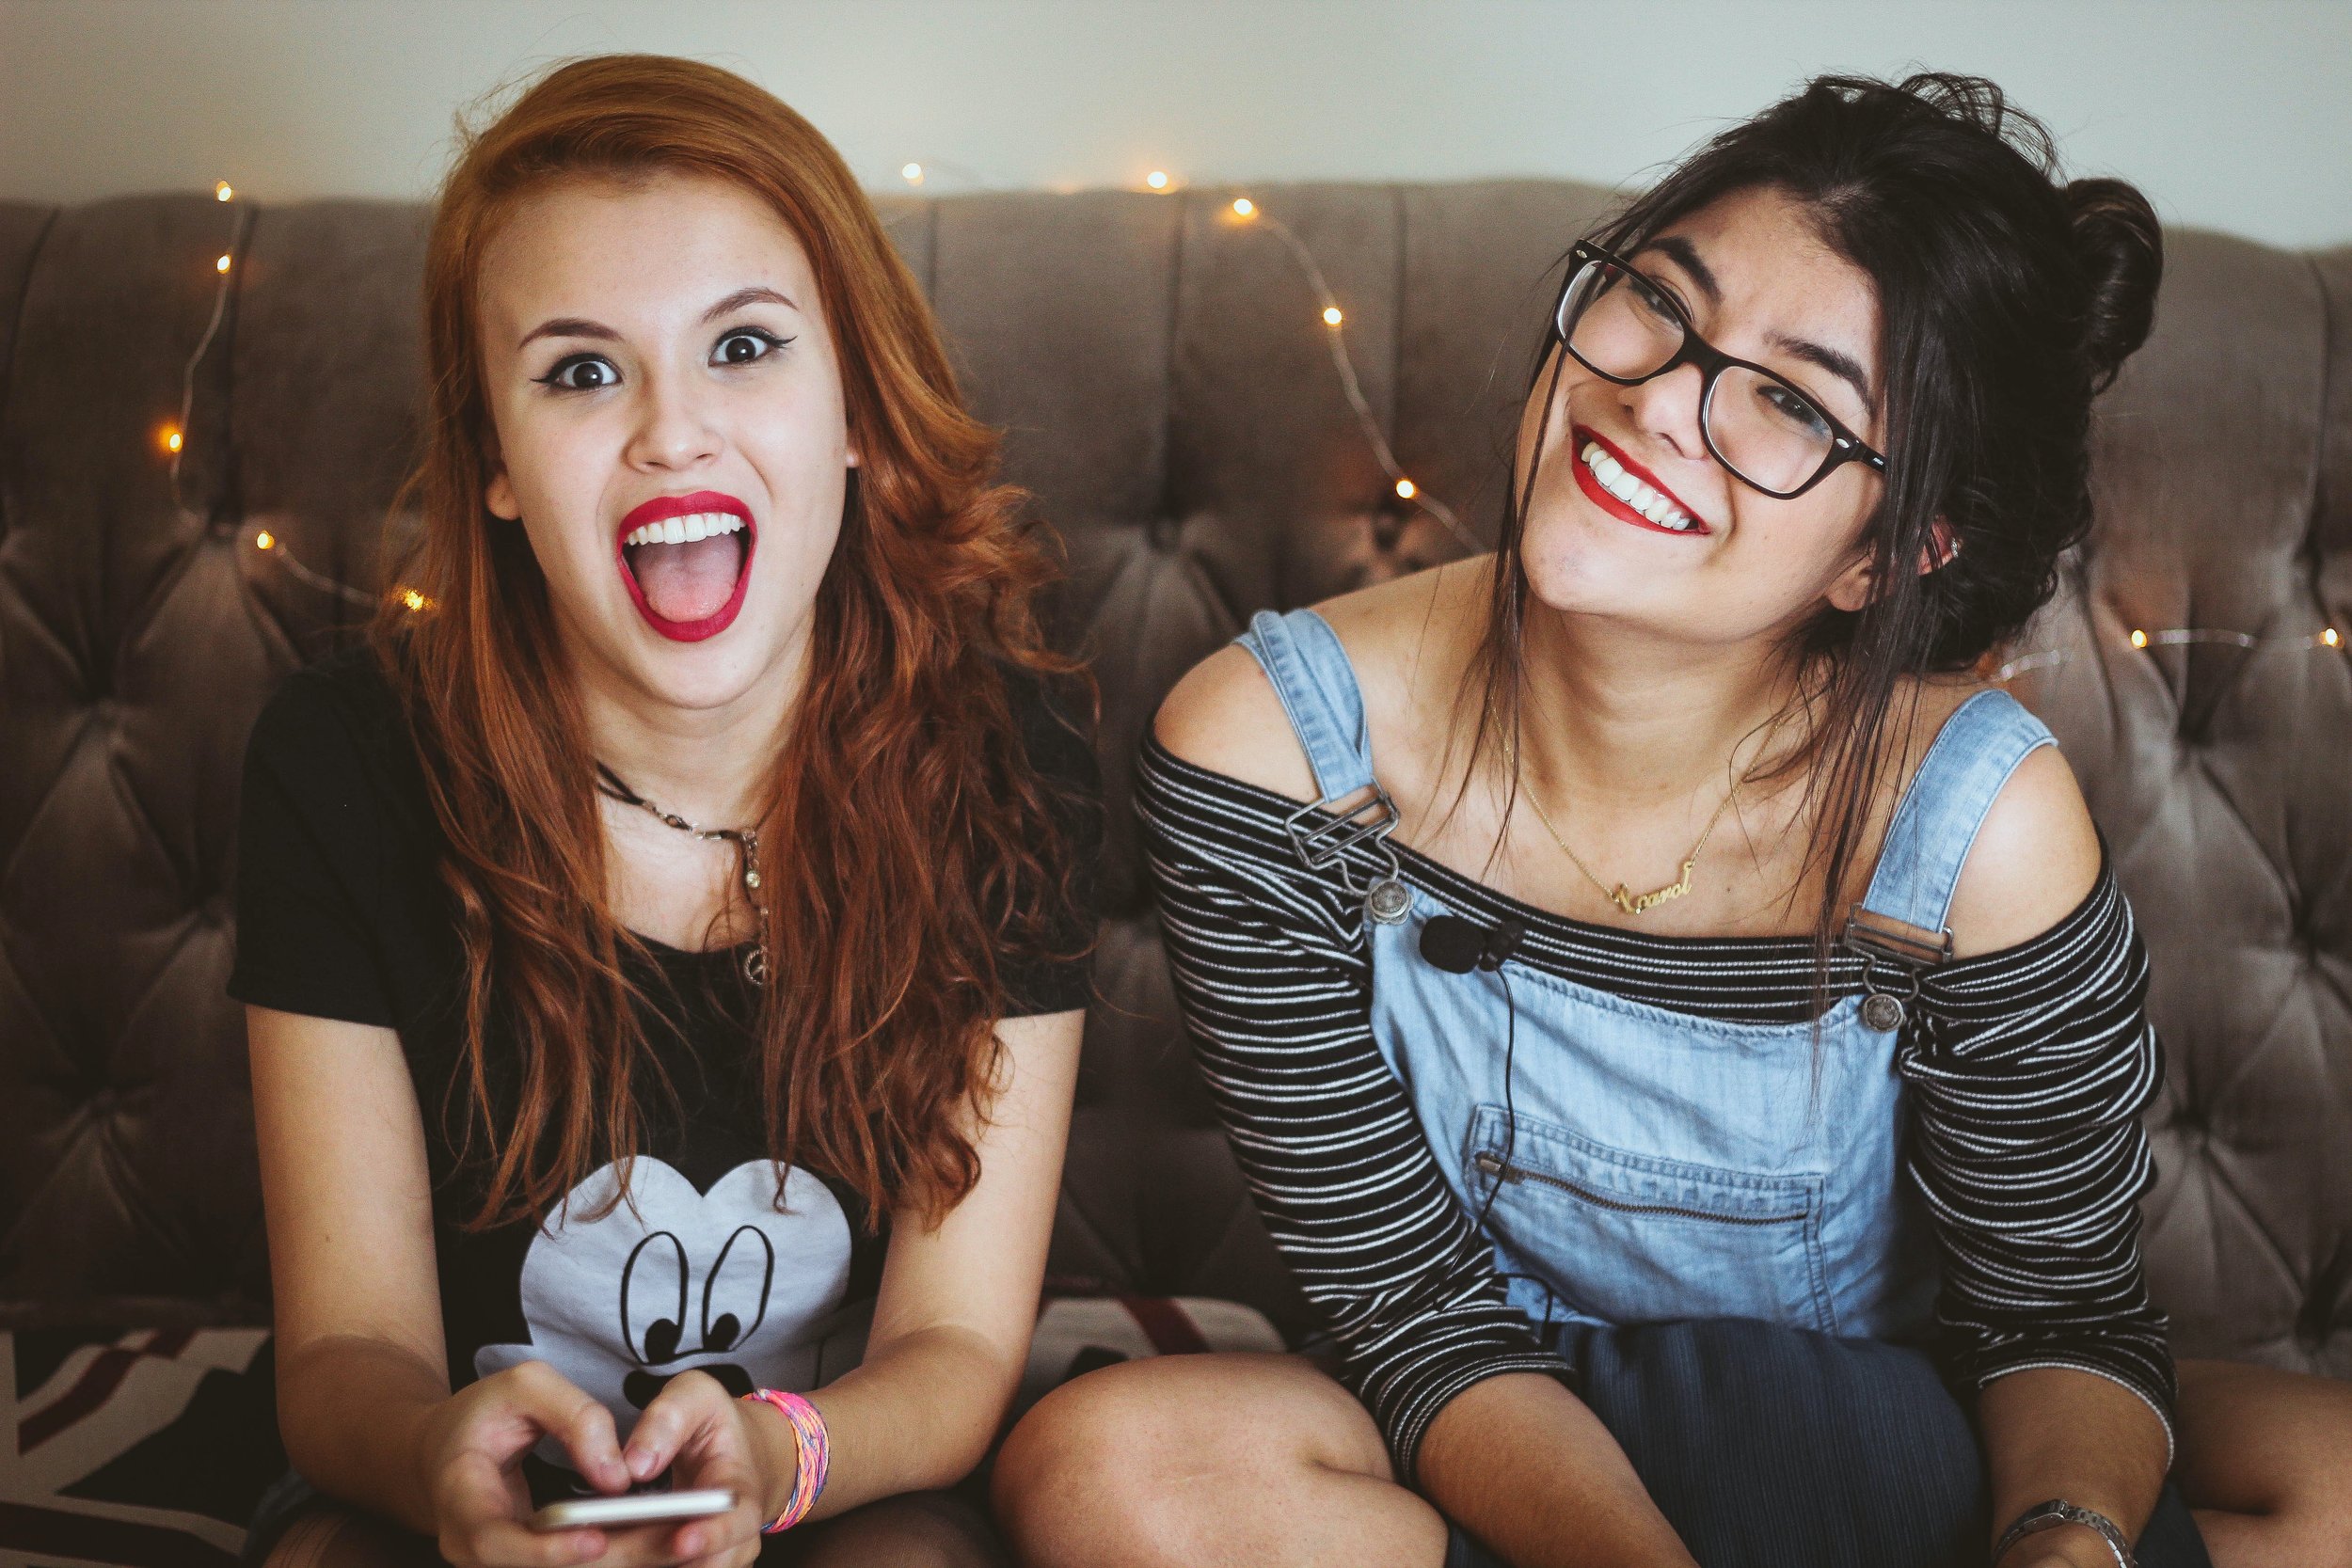  Two young female-presenting people sitting on a brown couch with lit fairy lights draped over it. The person on the left has red hair, red lipstick, and is sticking their tongue out at the camera. The person on the right has brunette hair, glasses a